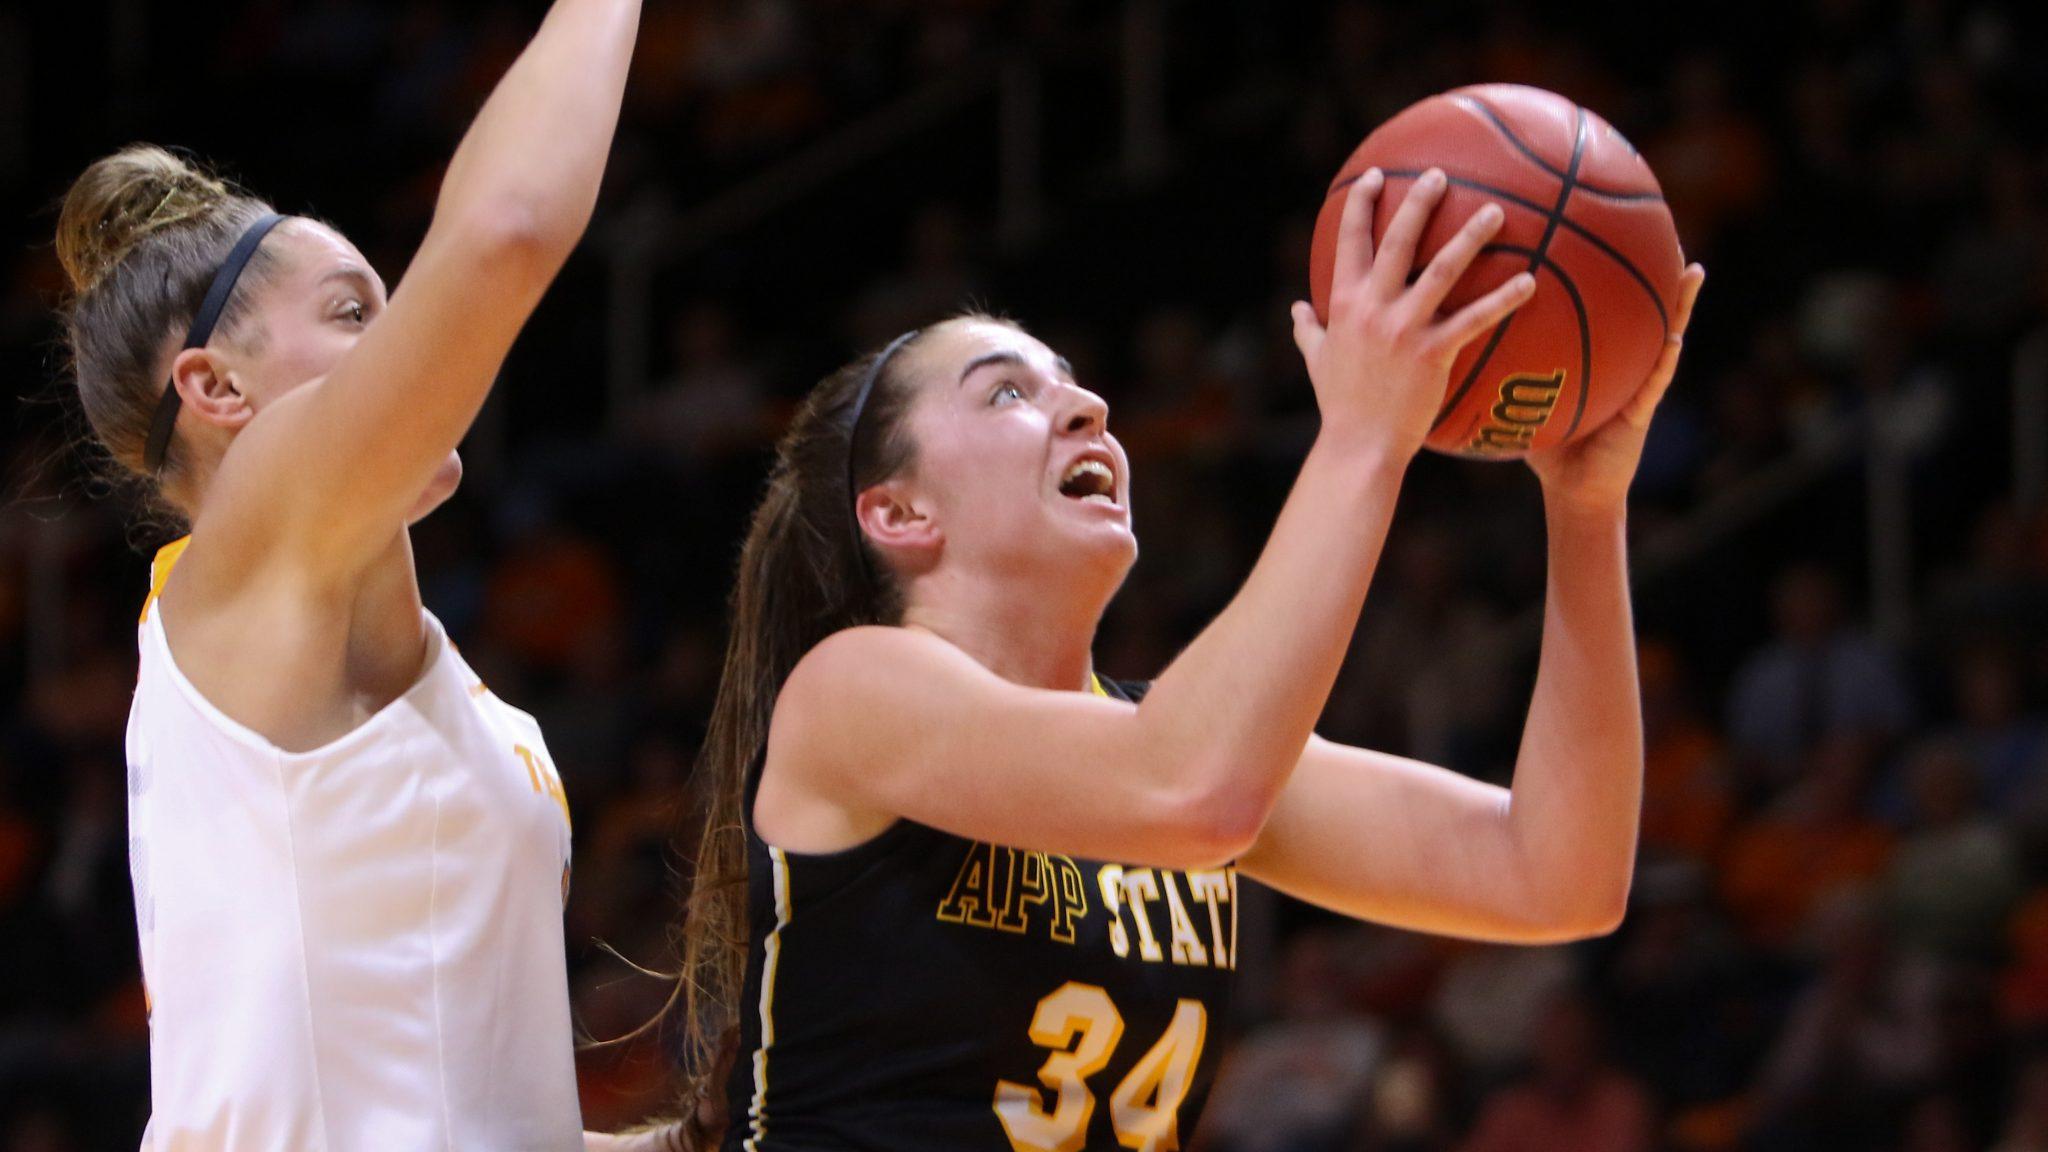 Appalachian State takes on Tennessee in non-conference women's basketball action at Thompson-Boling Arena on Wednesday, December 14, 2016 in Knoxville, Tennessee.
Photo Courtesy: App State Athletics/Randy Sartin